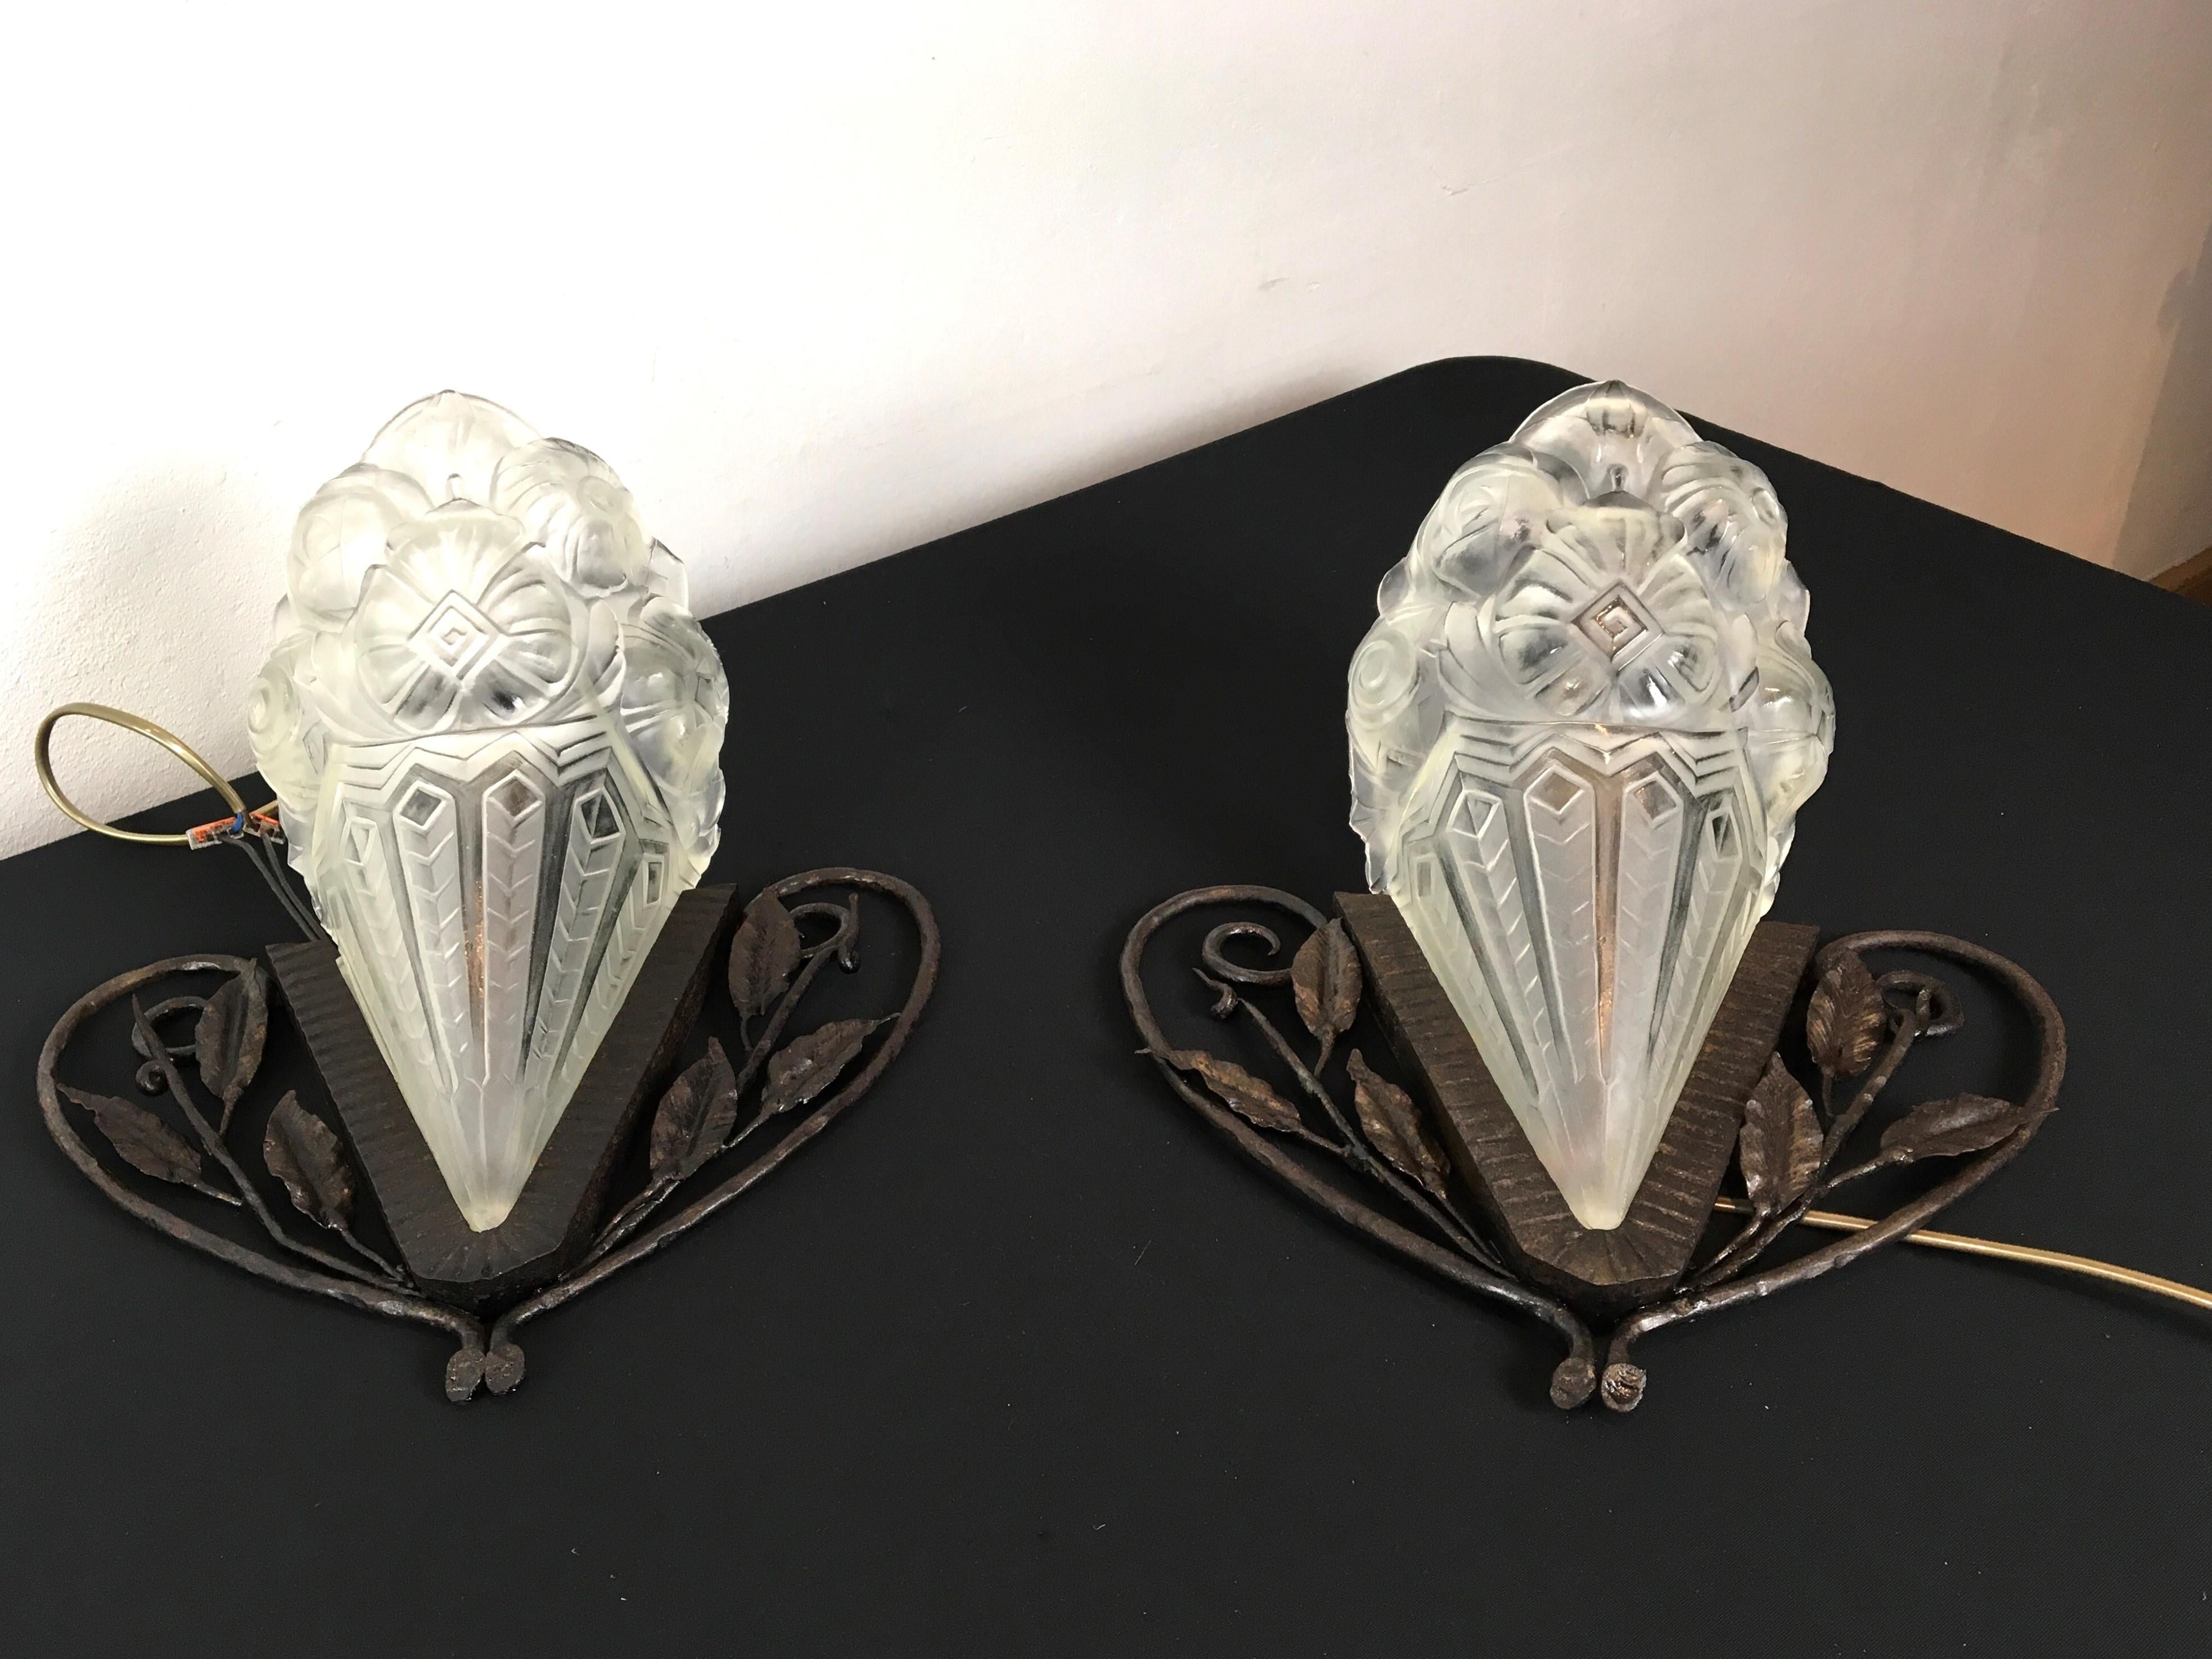 20th Century  Pair of Art Deco Wall Scones with Molded Clear Frosted Glass, 2 Pair Available